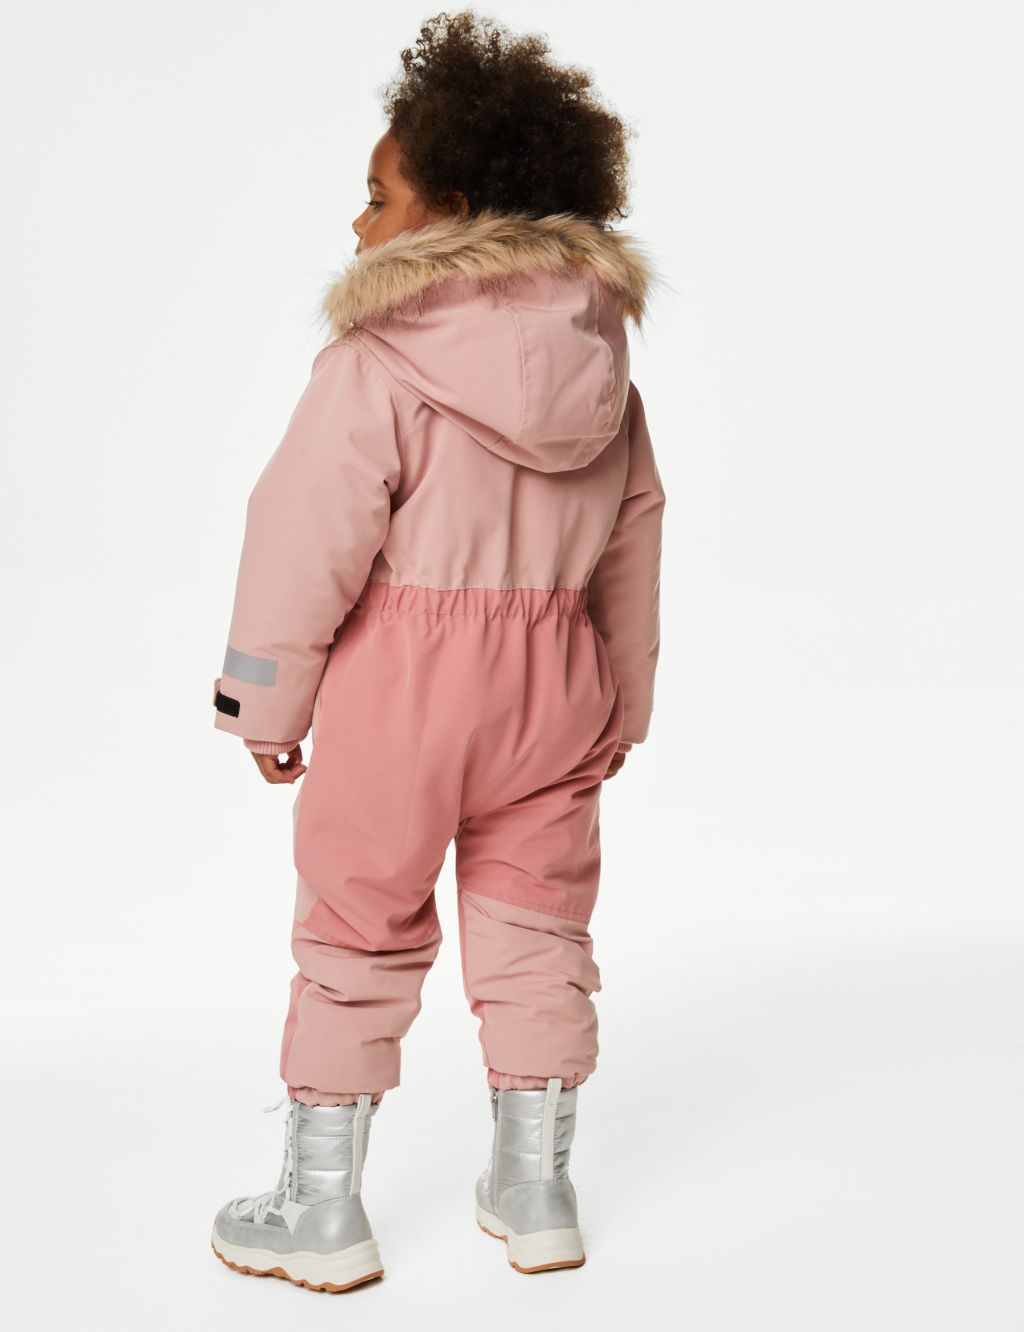 Padded Hooded Colour Block Snowsuitv (2-8 Yrs) image 6